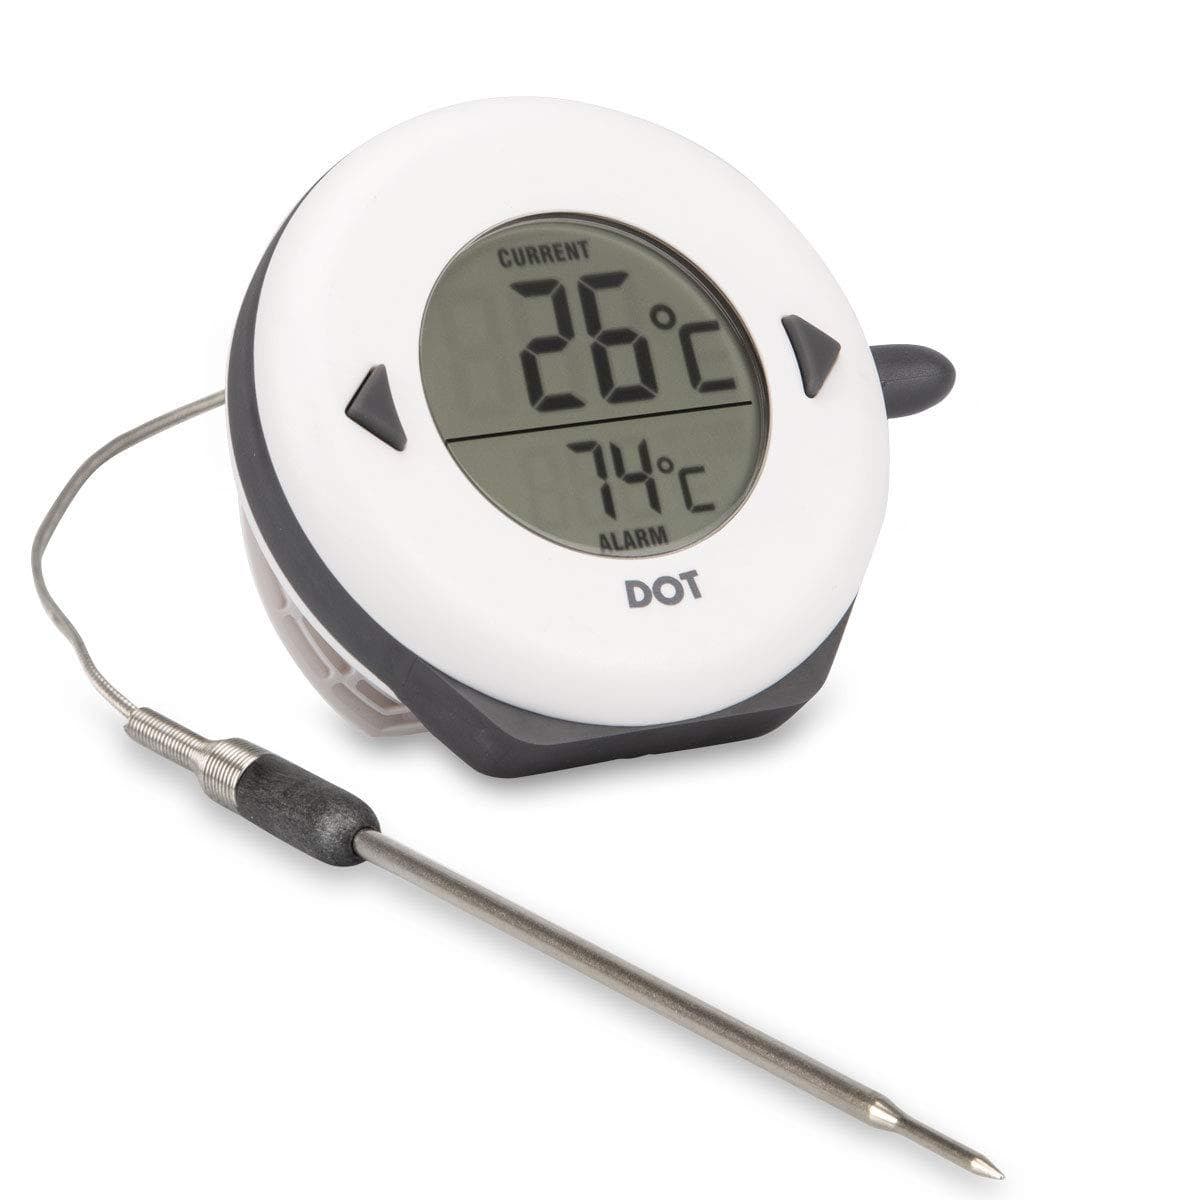 Thermapen Dot - Digital Thermometer